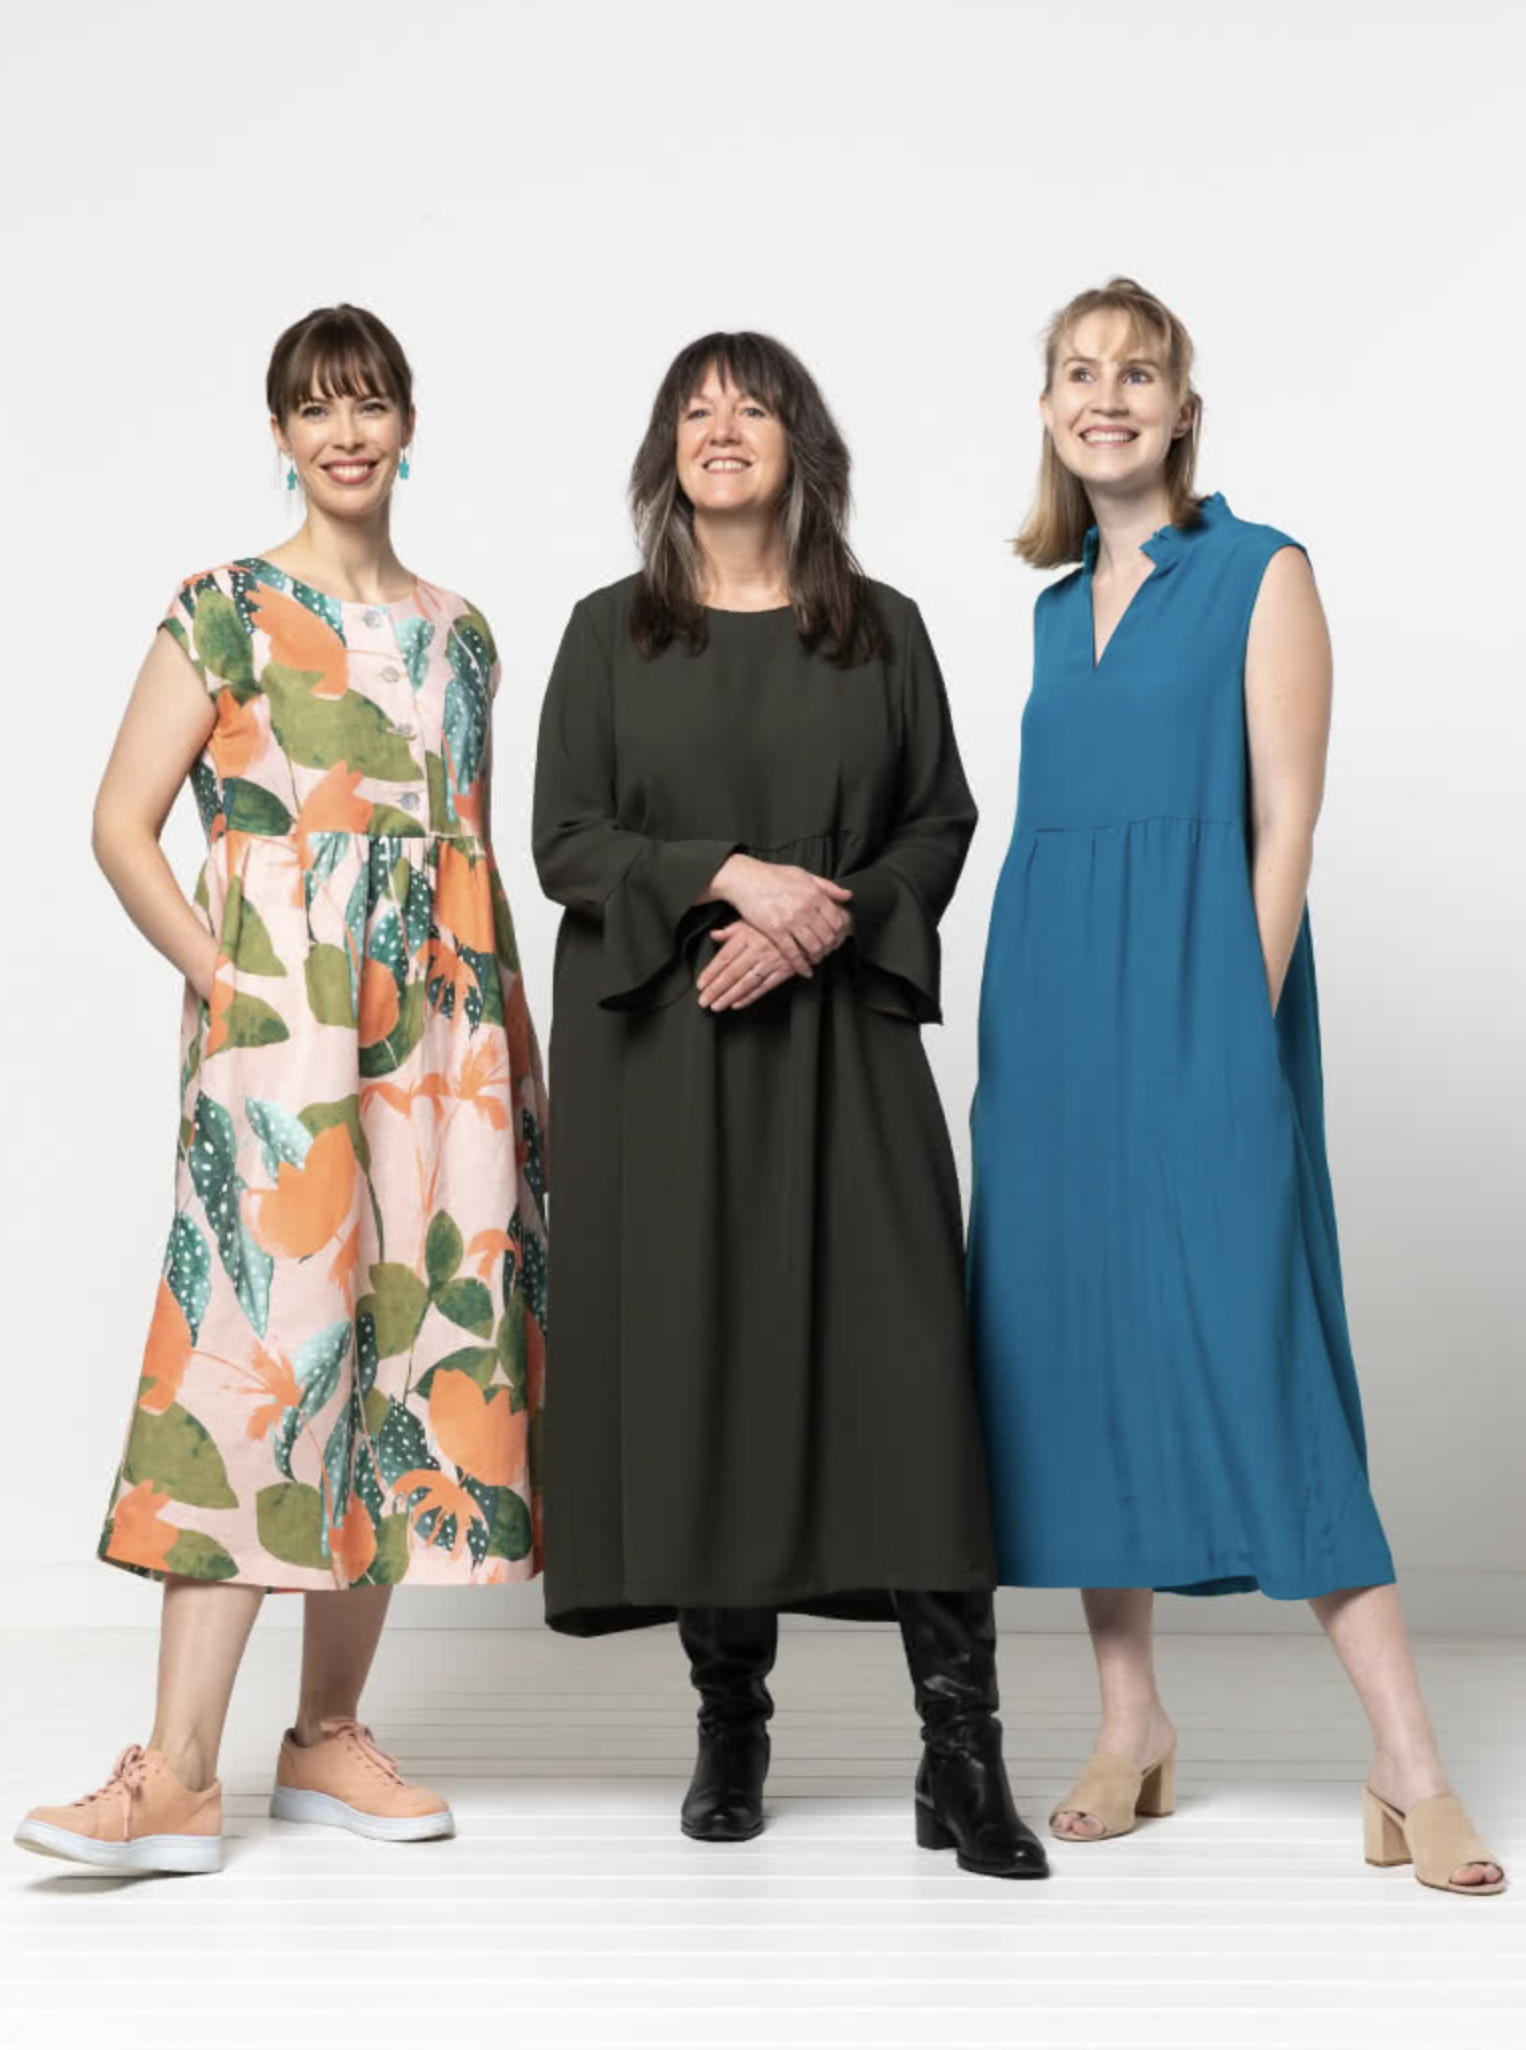 Women wearing the Montana Dress sewing pattern from Style Arc on The Fold Line. A dress pattern made in washed linen, cotton, crepe, or rayon fabrics, featuring pattern pieces to add sleeveless, ¾ or elbow length sleeves, and boat, V-neck or frilled stand